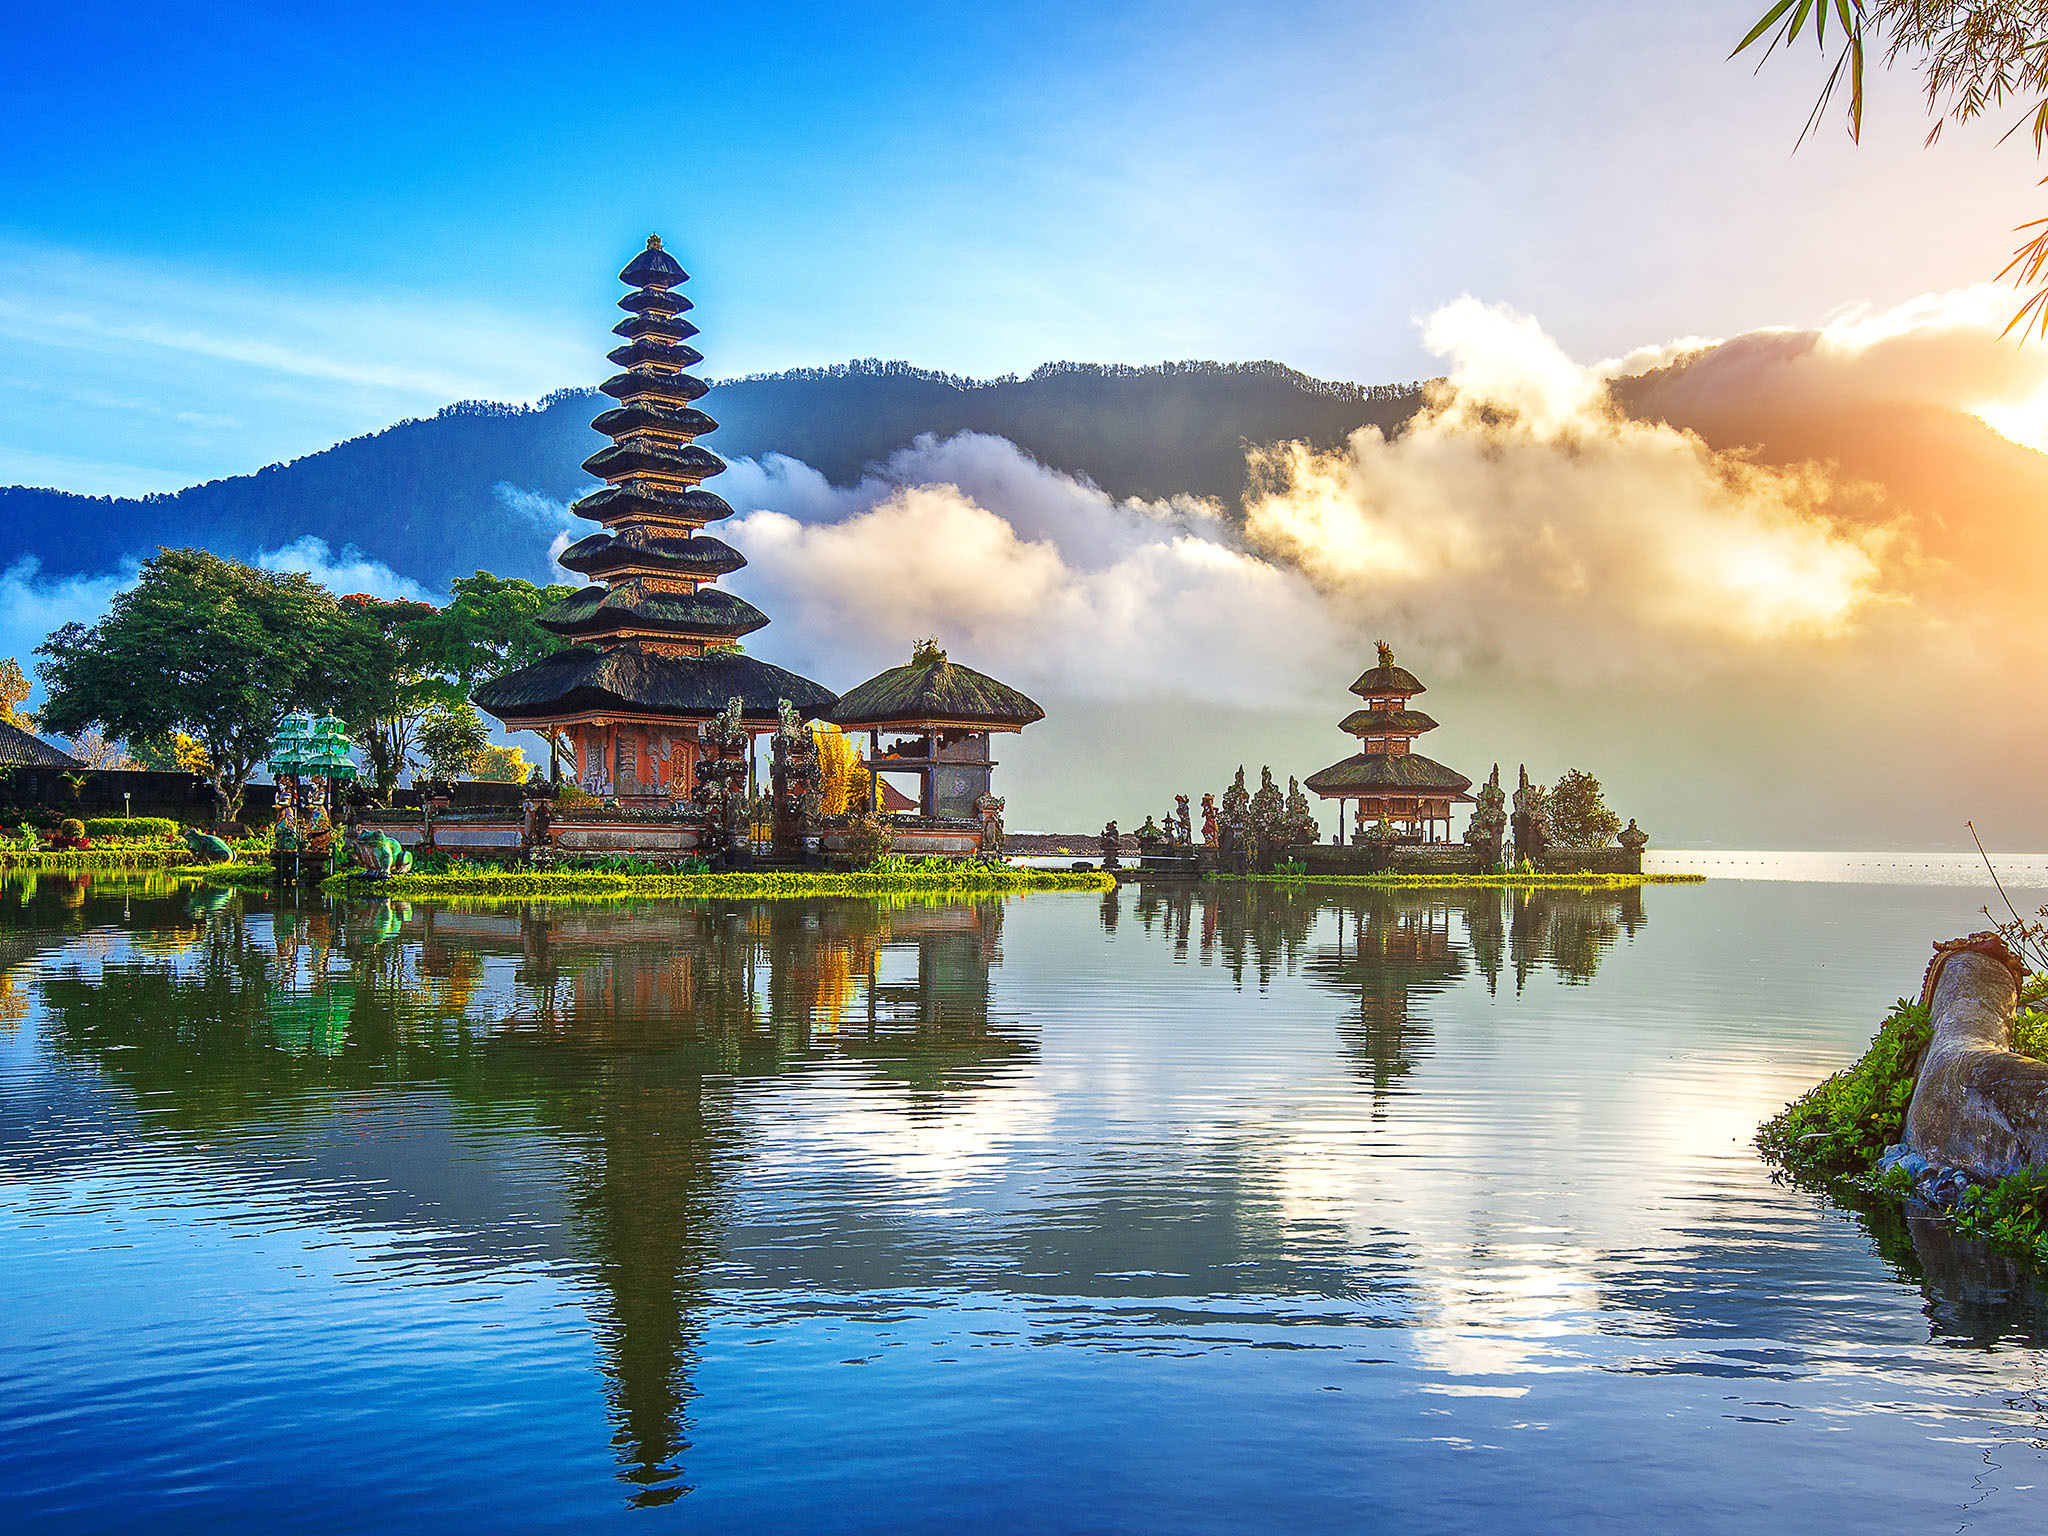 Bali to allow international travellers without quarantine from March 14 on trial basis